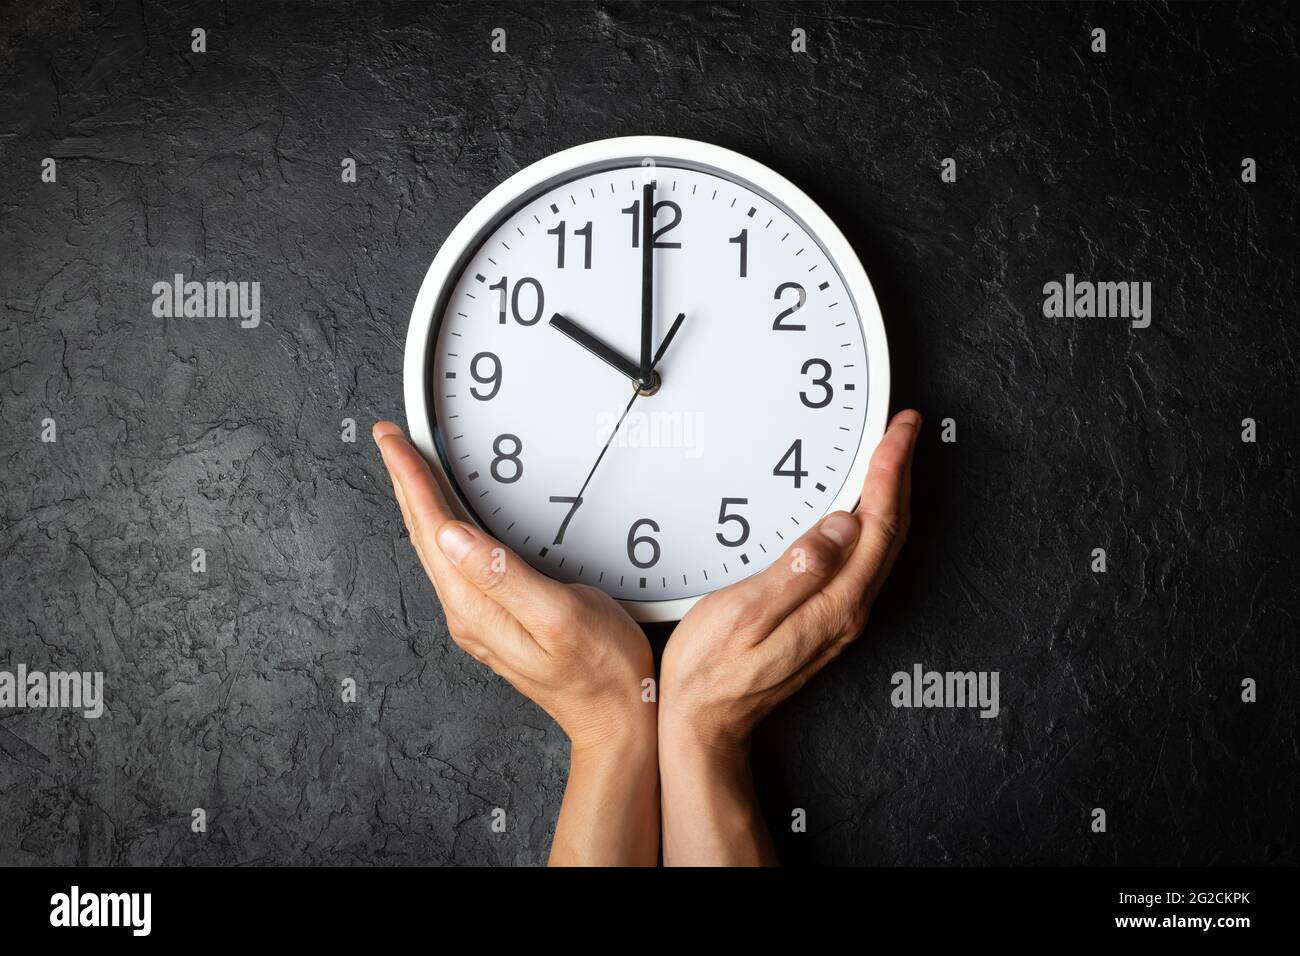 Wall clock on man hands on the black texture background. Flowing time concept Stock Photo